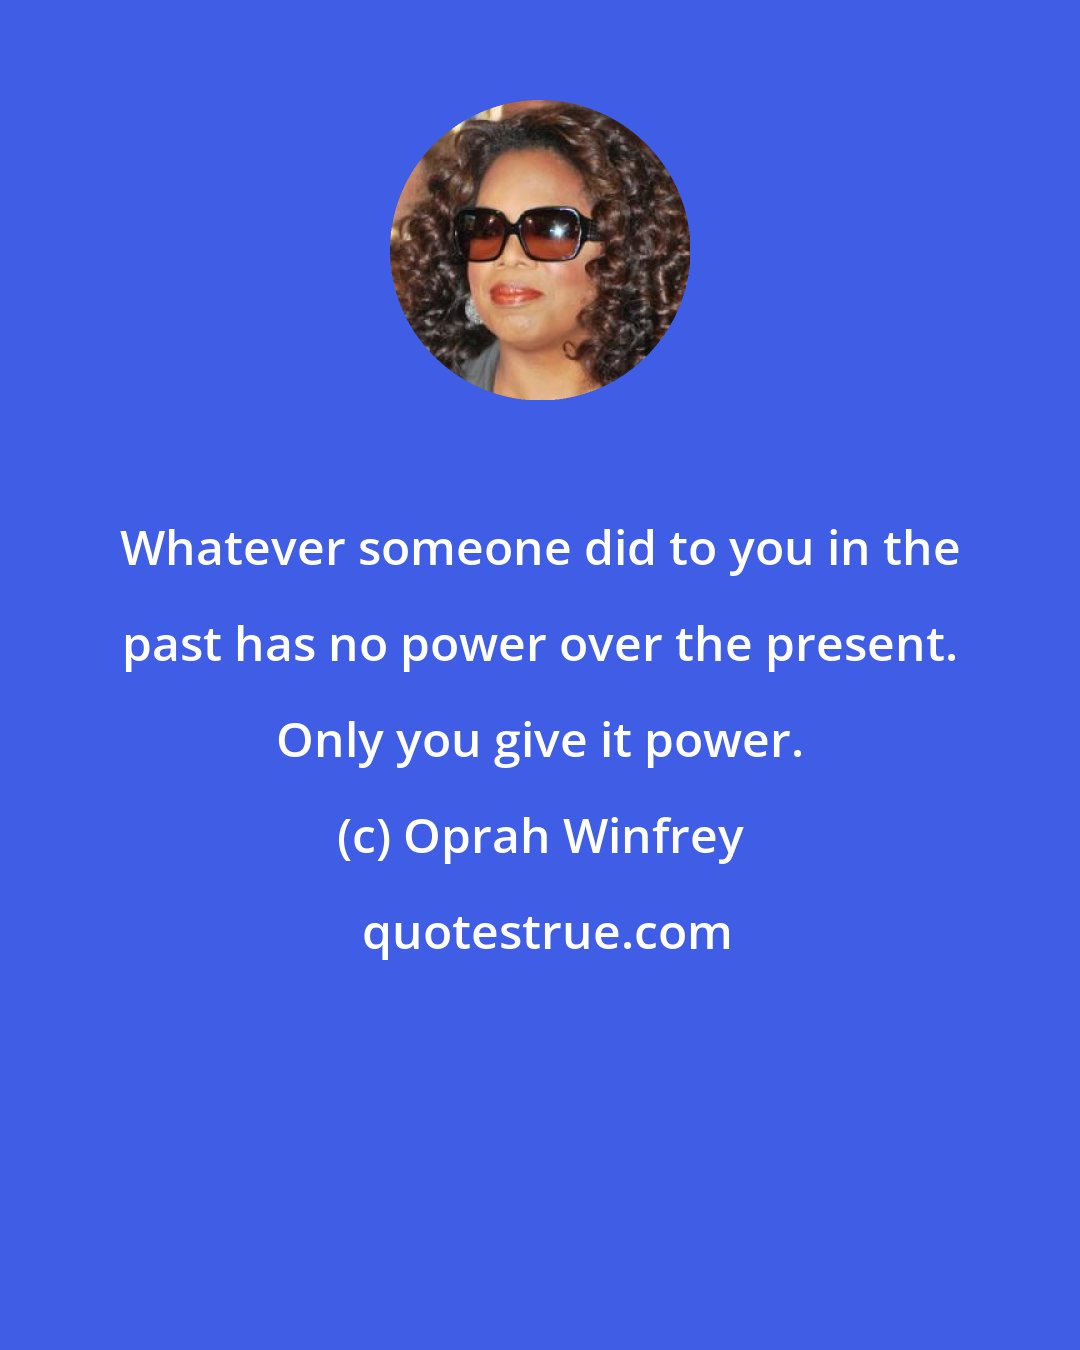 Oprah Winfrey: Whatever someone did to you in the past has no power over the present. Only you give it power.